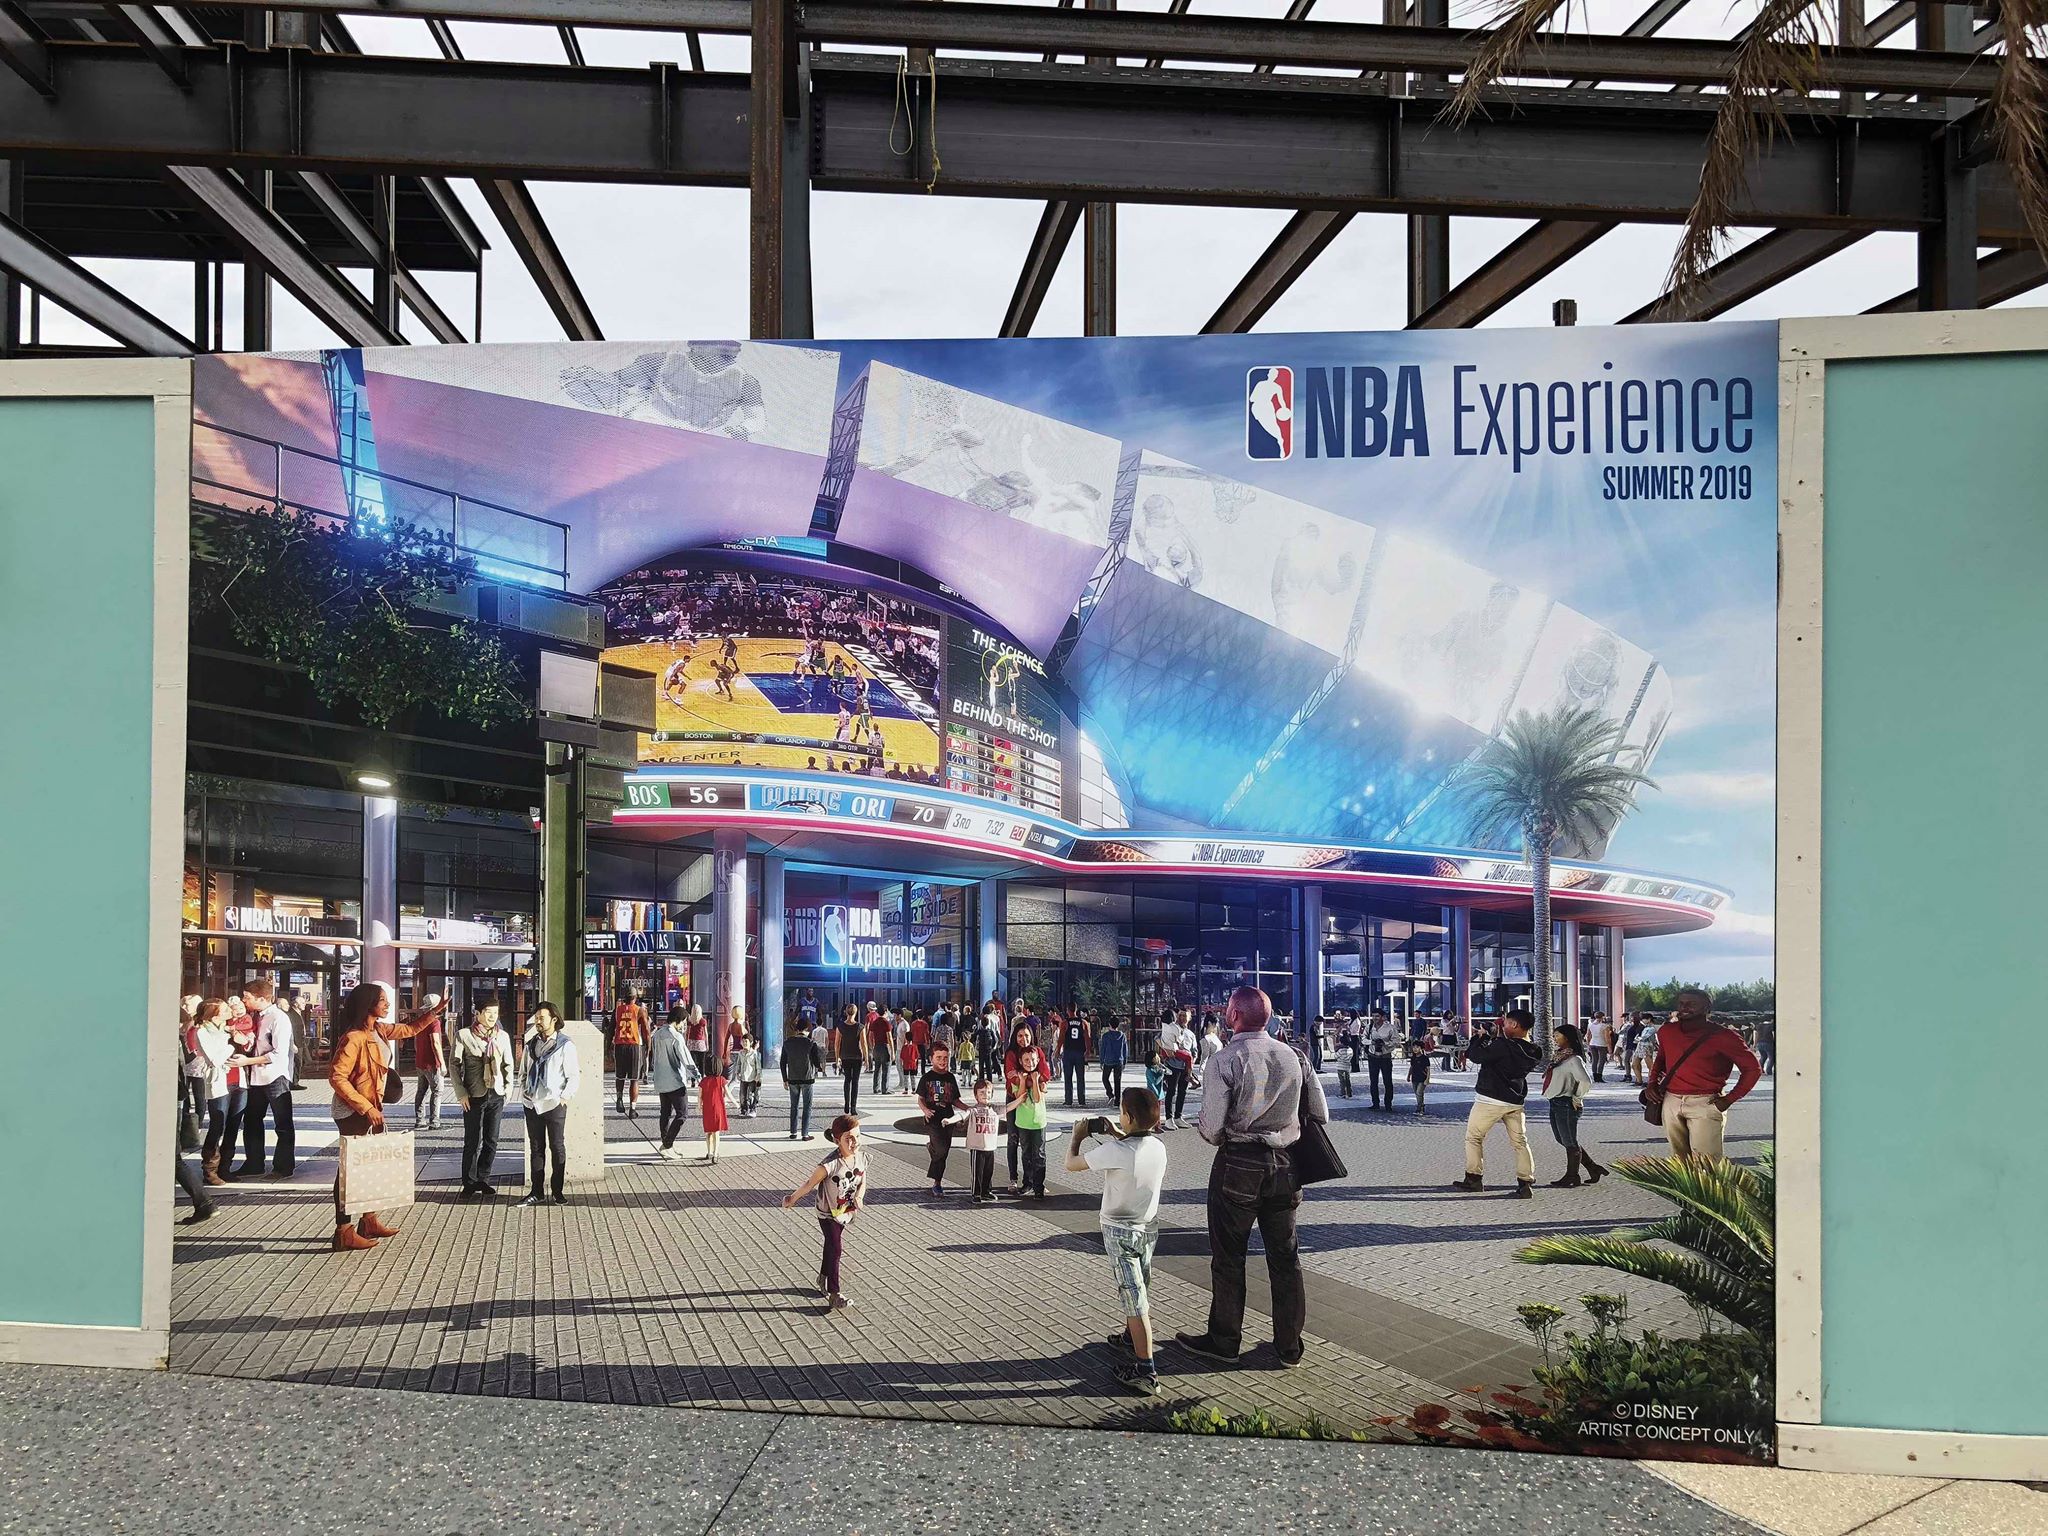 Construction Update in NBA Experience Coming to Disney Springs